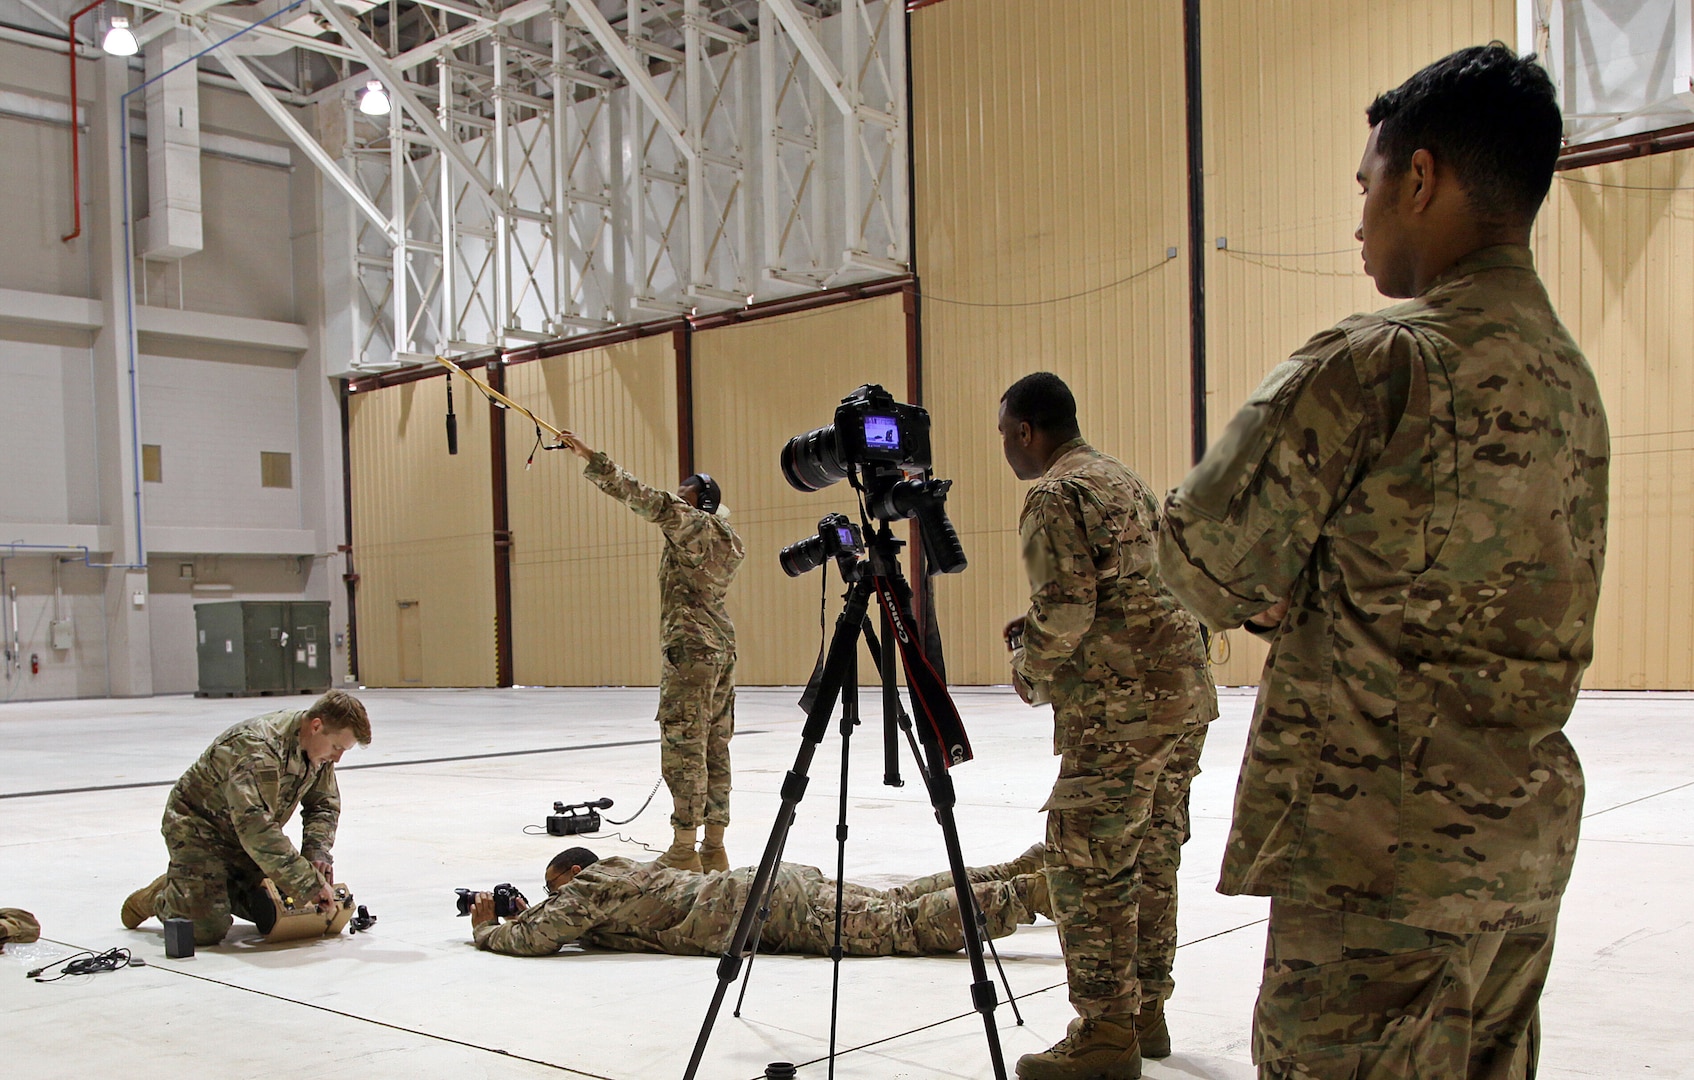 U.S. Army Soldiers assigned to the Military Information Support Task Force-Central (MISTF-C) Production Development Detachment capture a Psychological Operations Specialist setting up a Next Generation Loudspeaker System on Dec. 7, 2016 at Al Udeid Air Base, Qatar. (U.S. Army Photo by Staff Sgt. Brian)